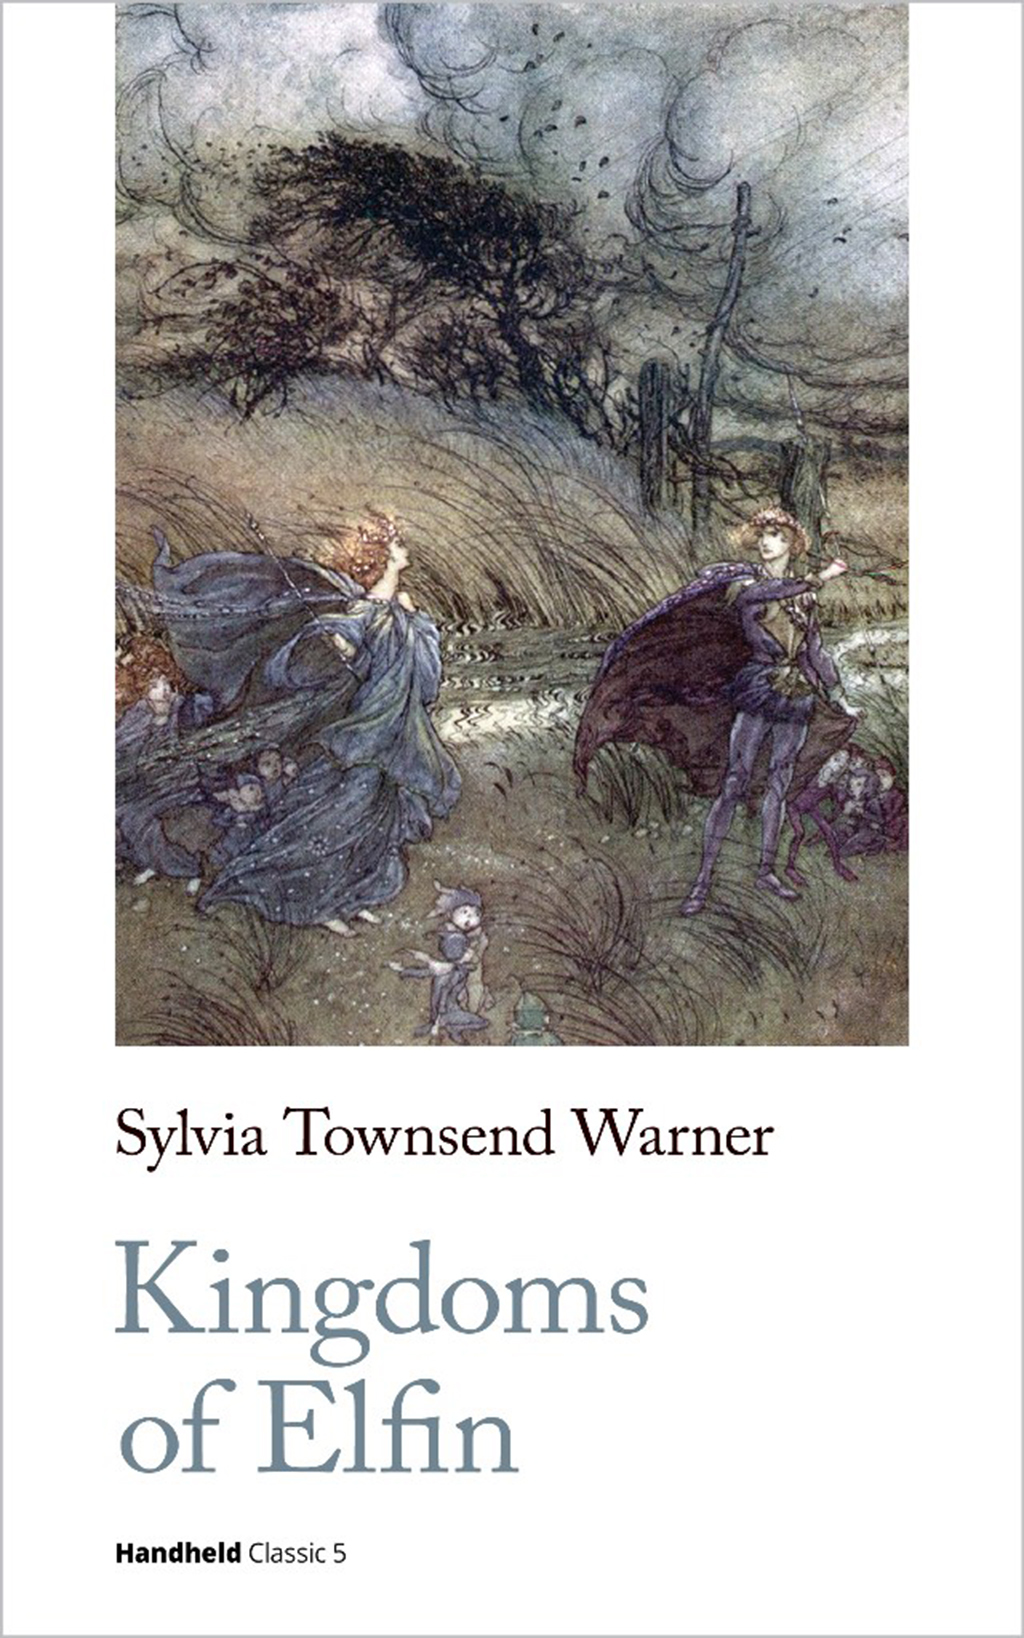 The cover to Sylvia Townsend Warner's Kingdoms of Elfin, being republished this Halloween